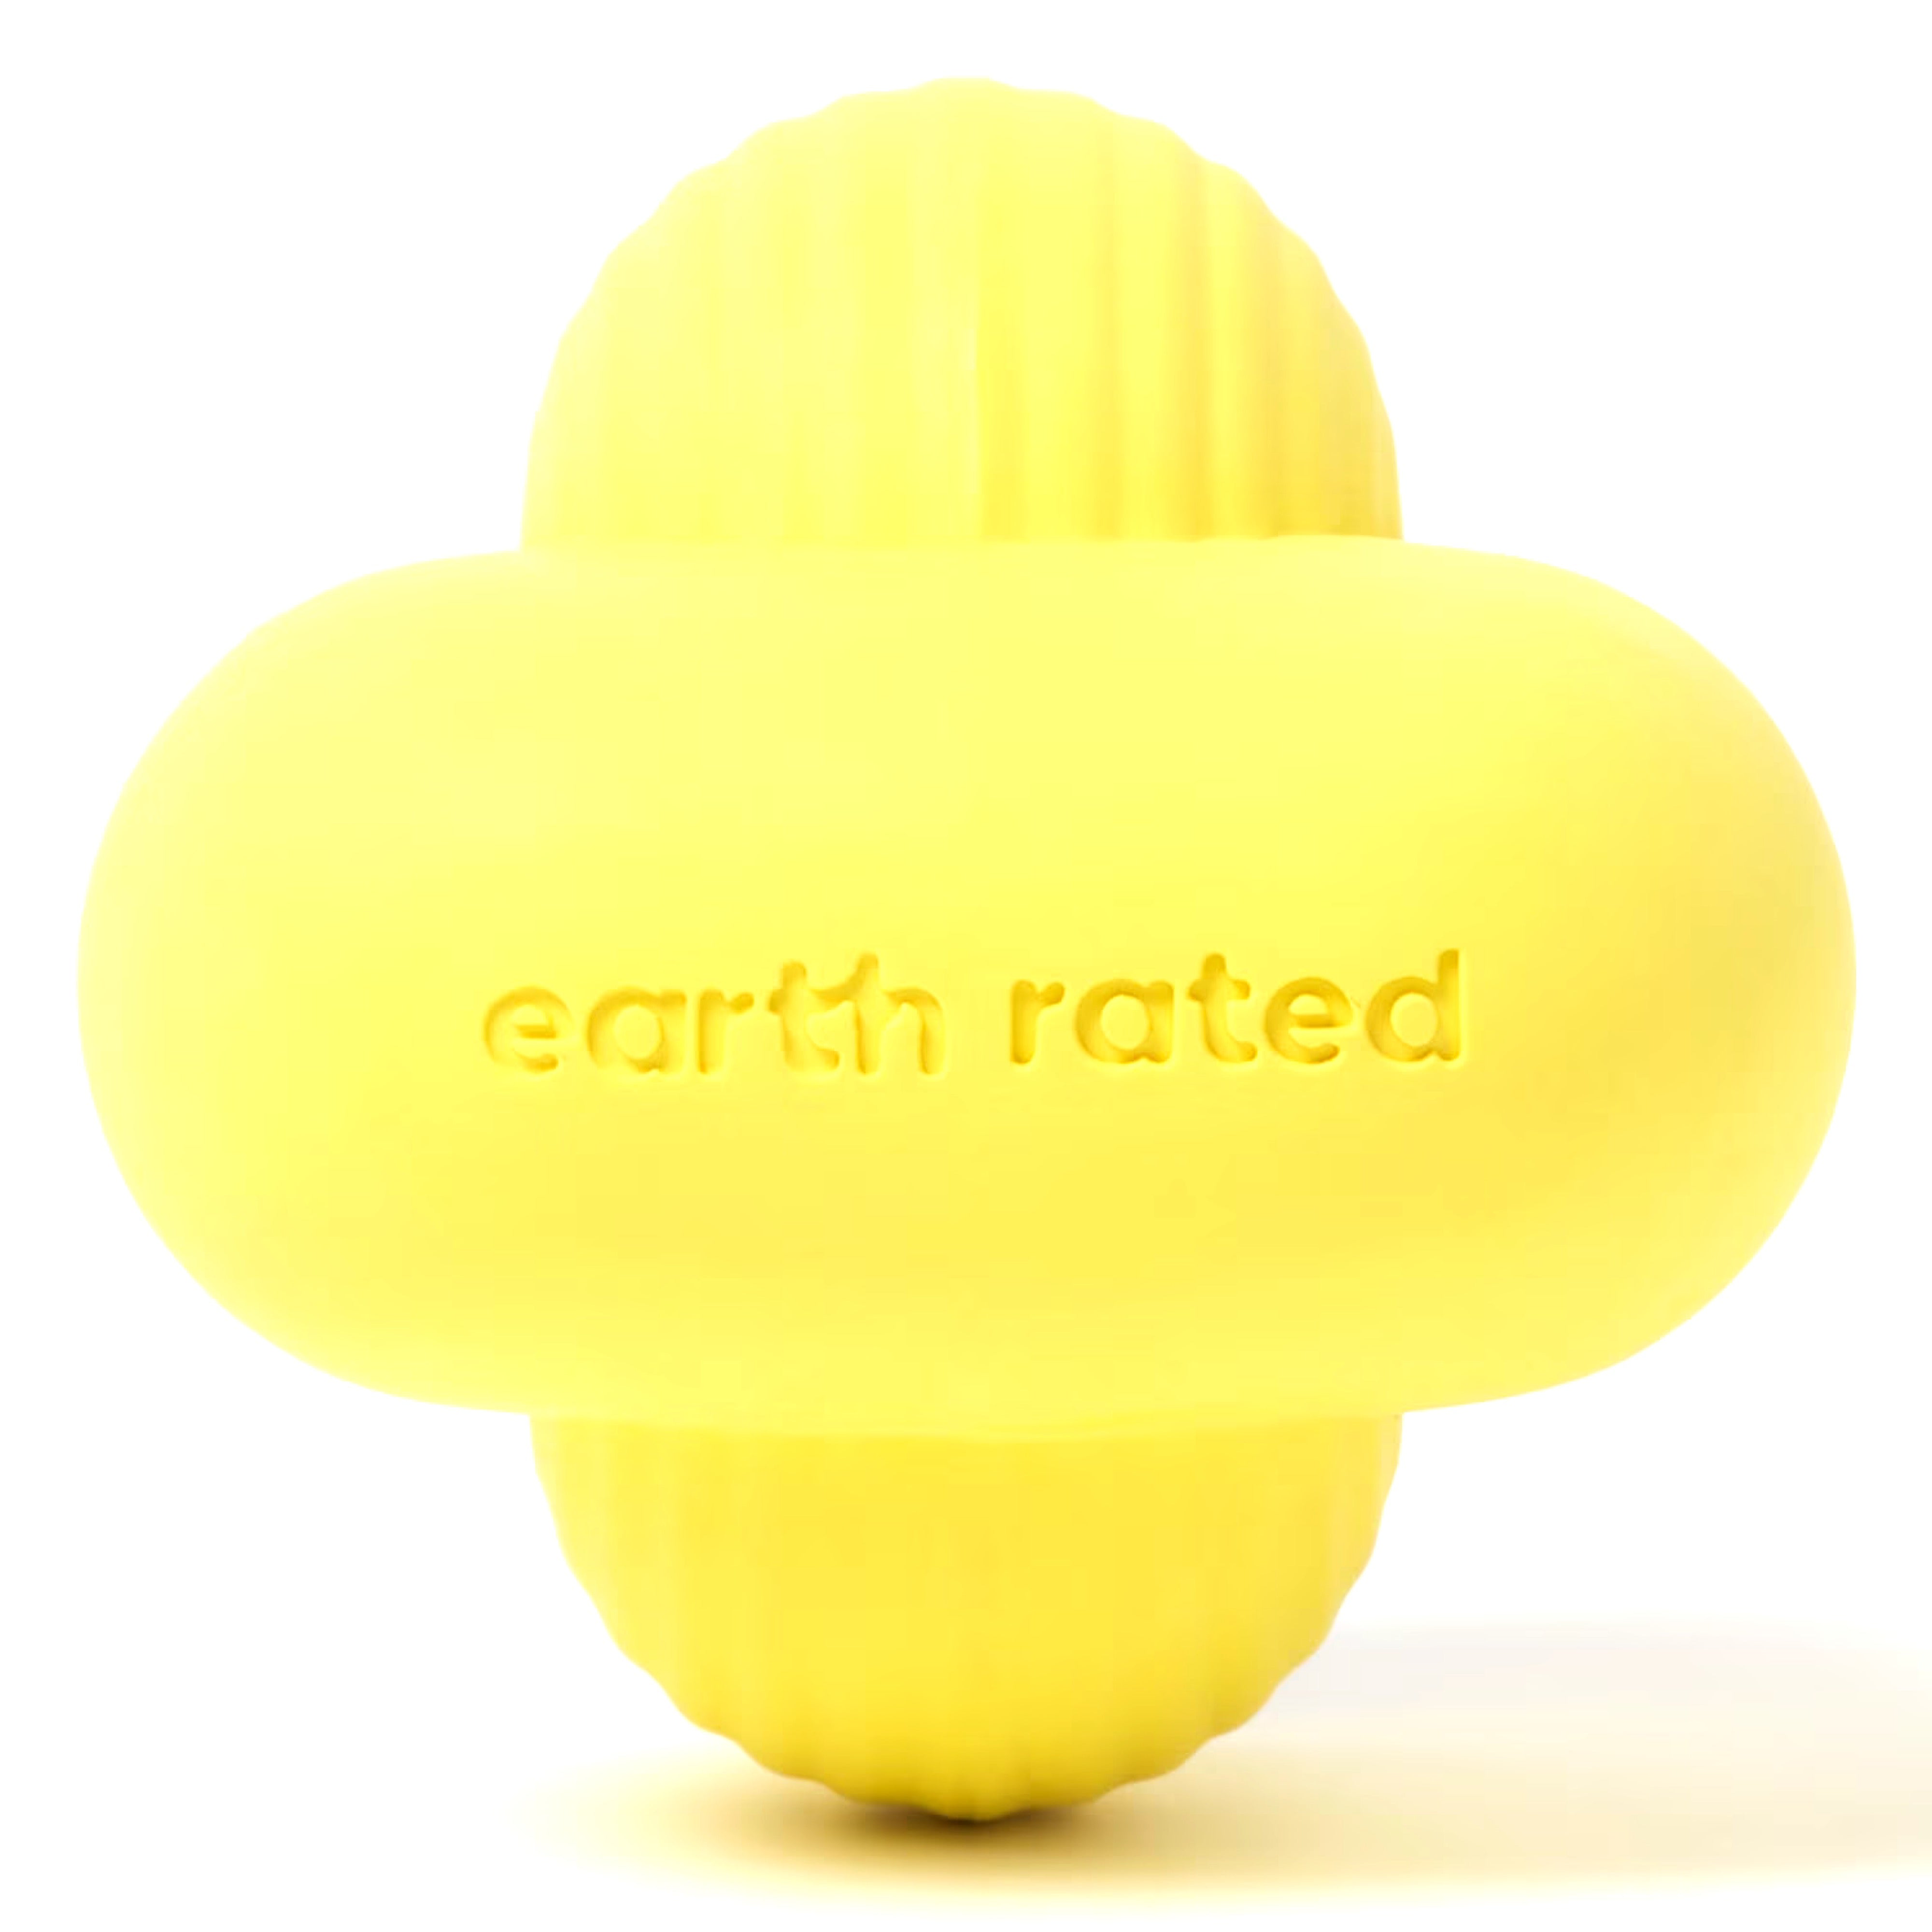 Earth Rated Rubber Fetch Toy